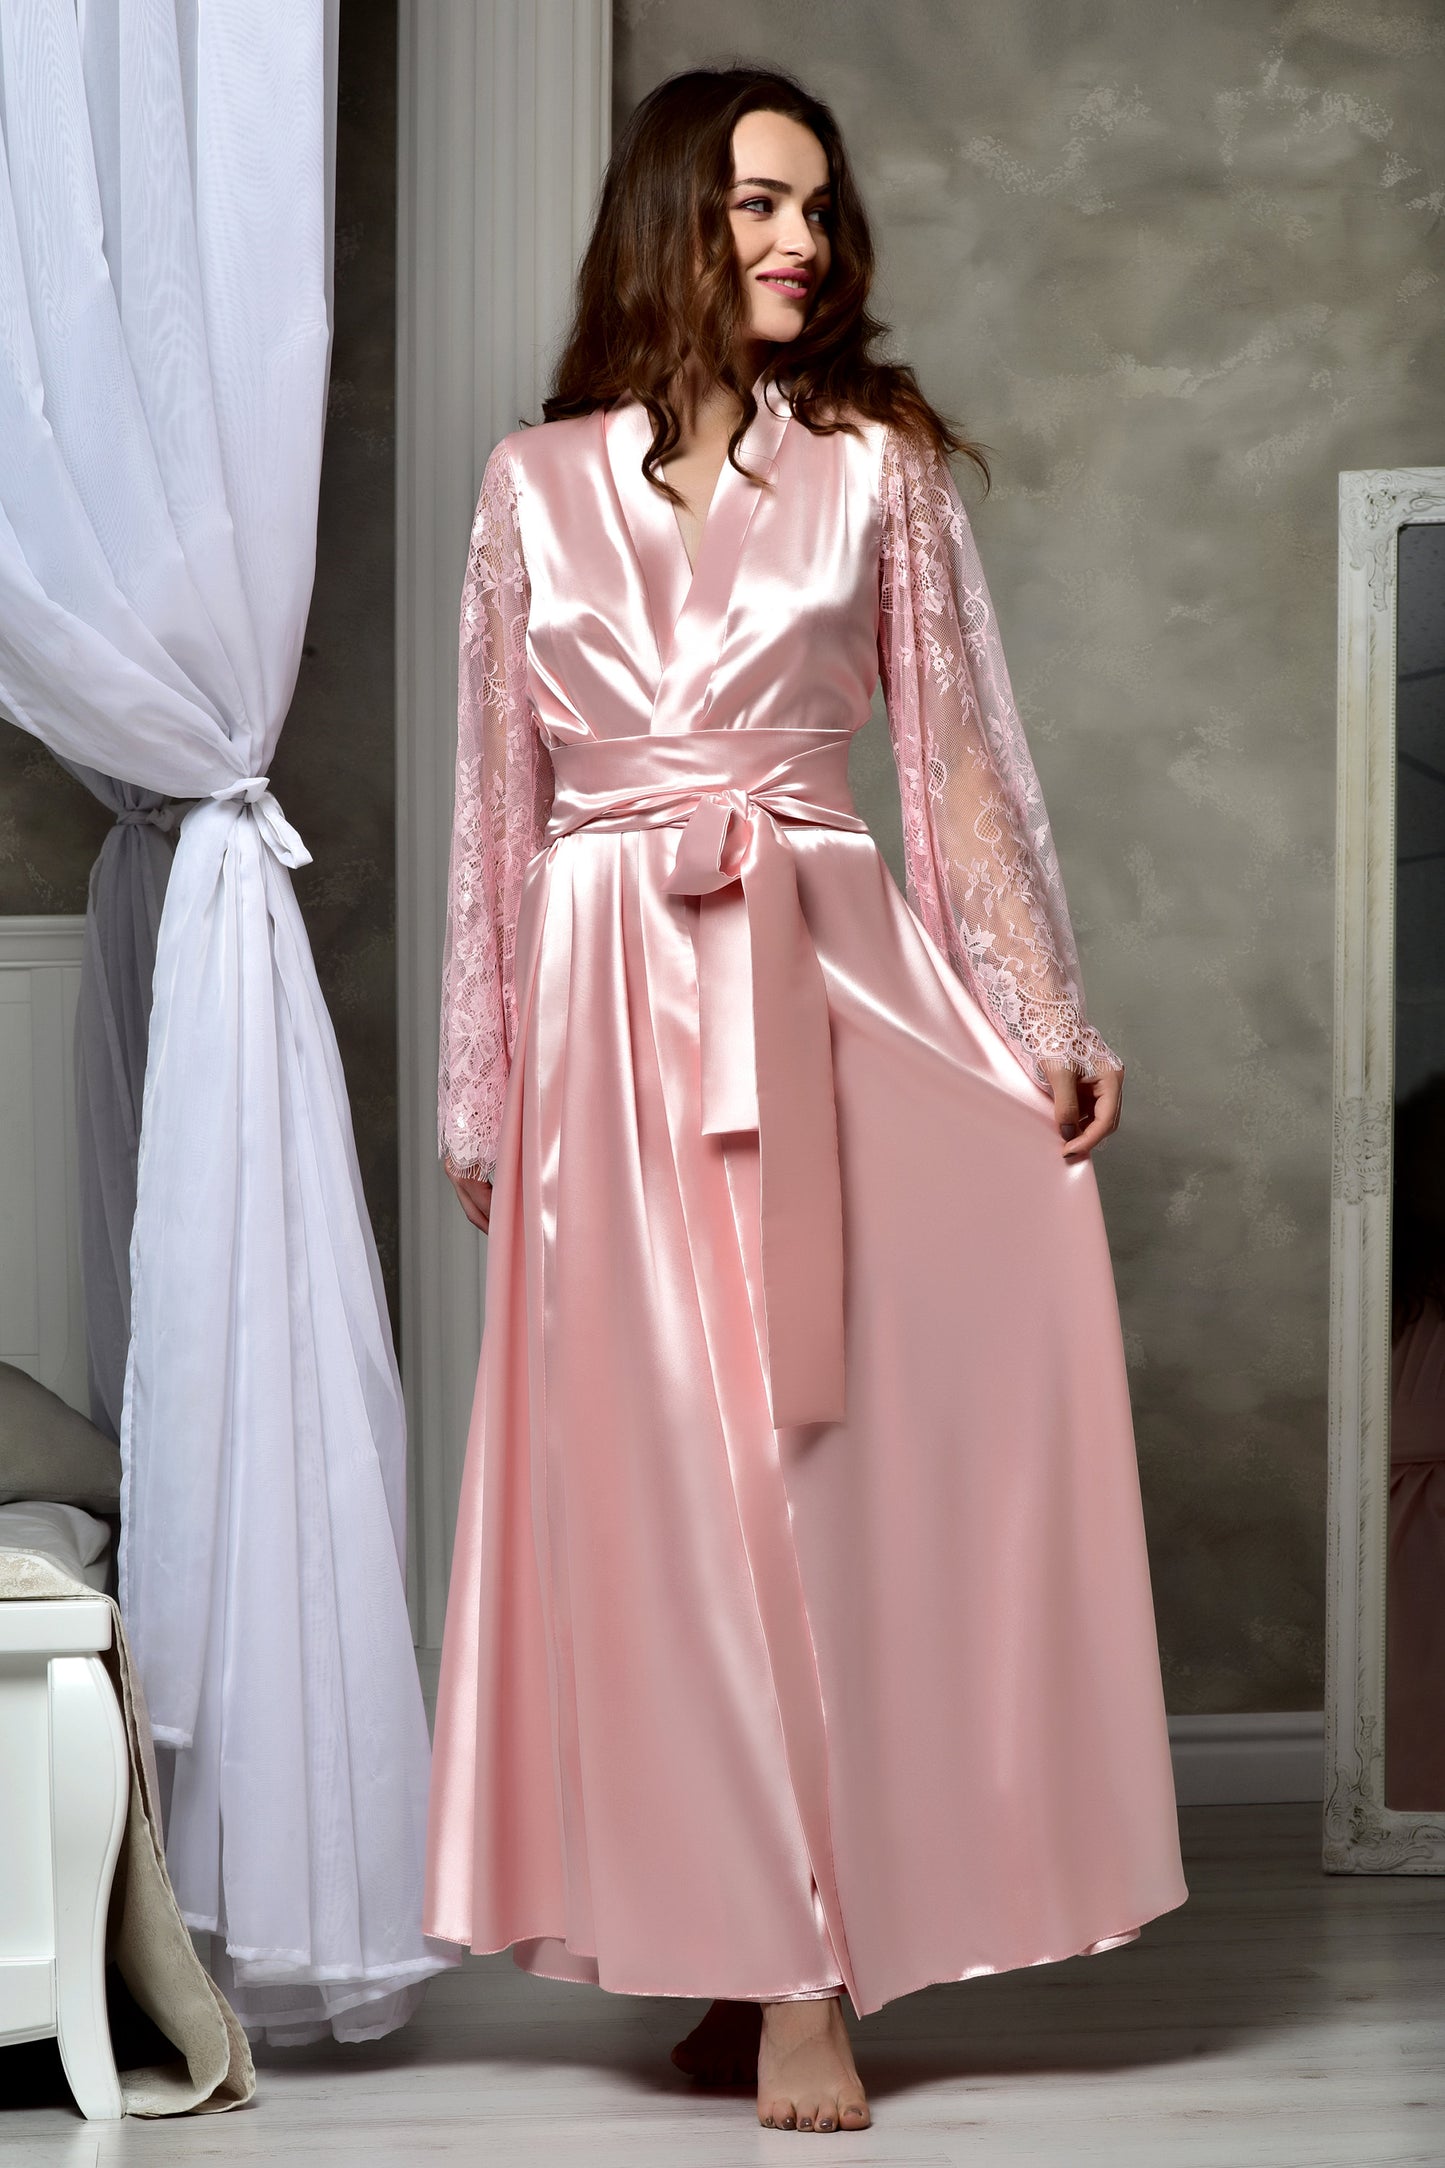 Elegant bridal preparation with our Blush Pink Lace Sleeve Robe